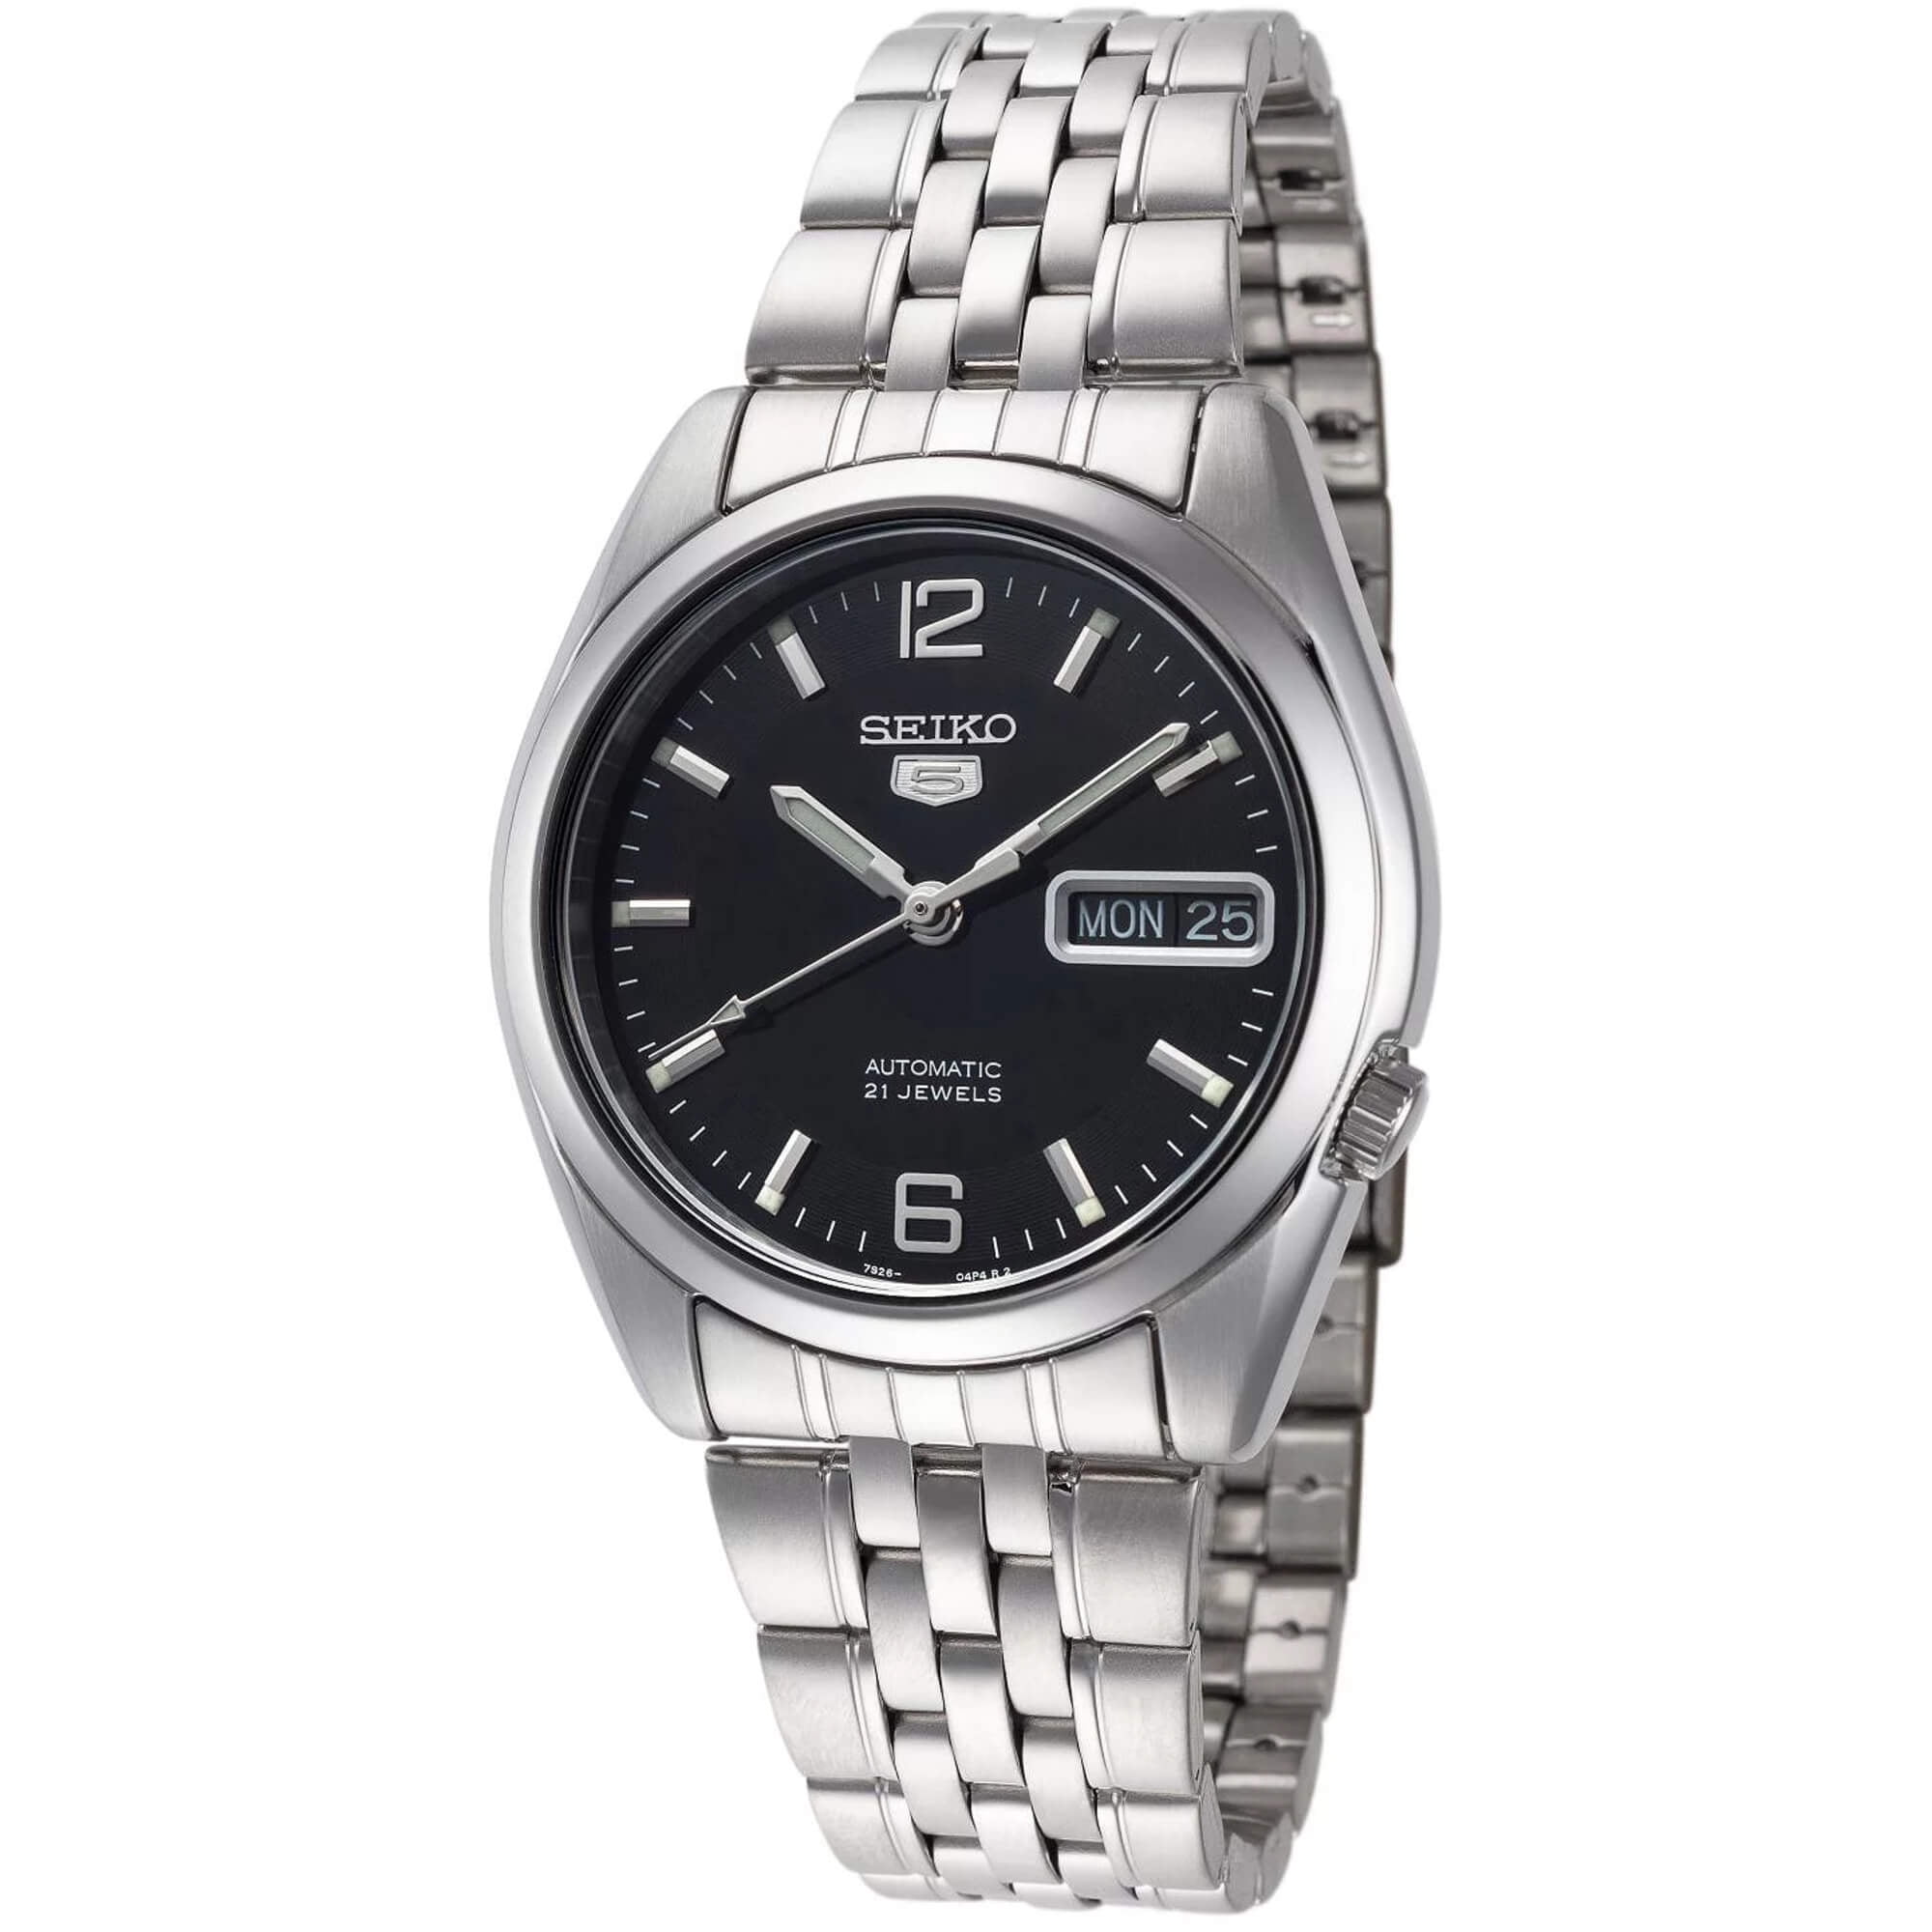 Seiko Men's 5 Automatic SNK393K Black Stainless-Steel Automatic Dress ...